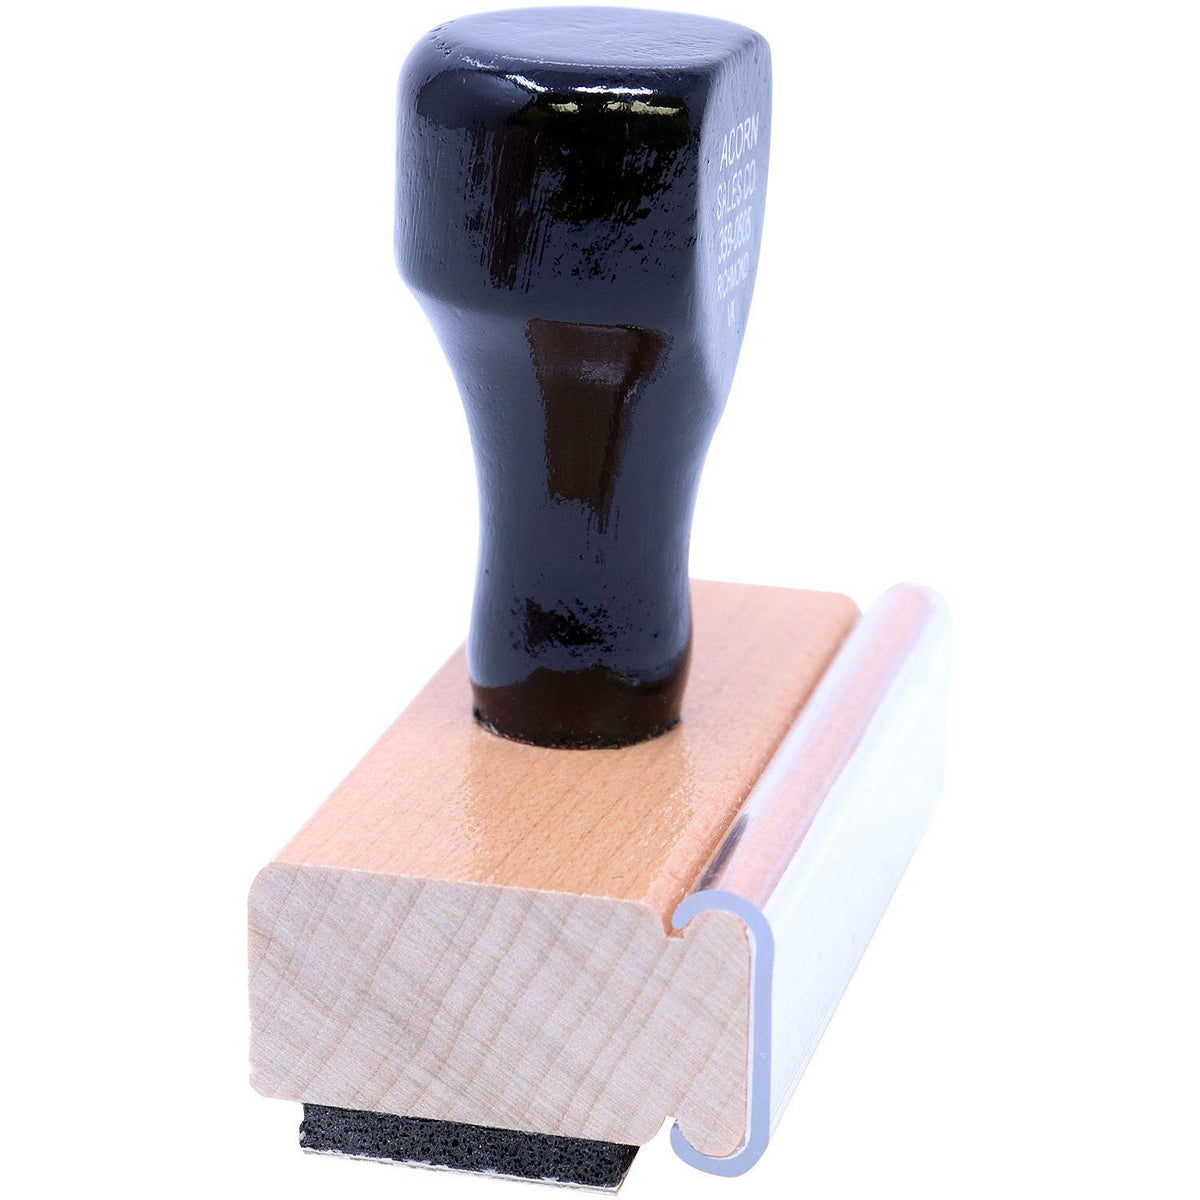 Side View of Certified Copy Rubber Stamp at an Angle